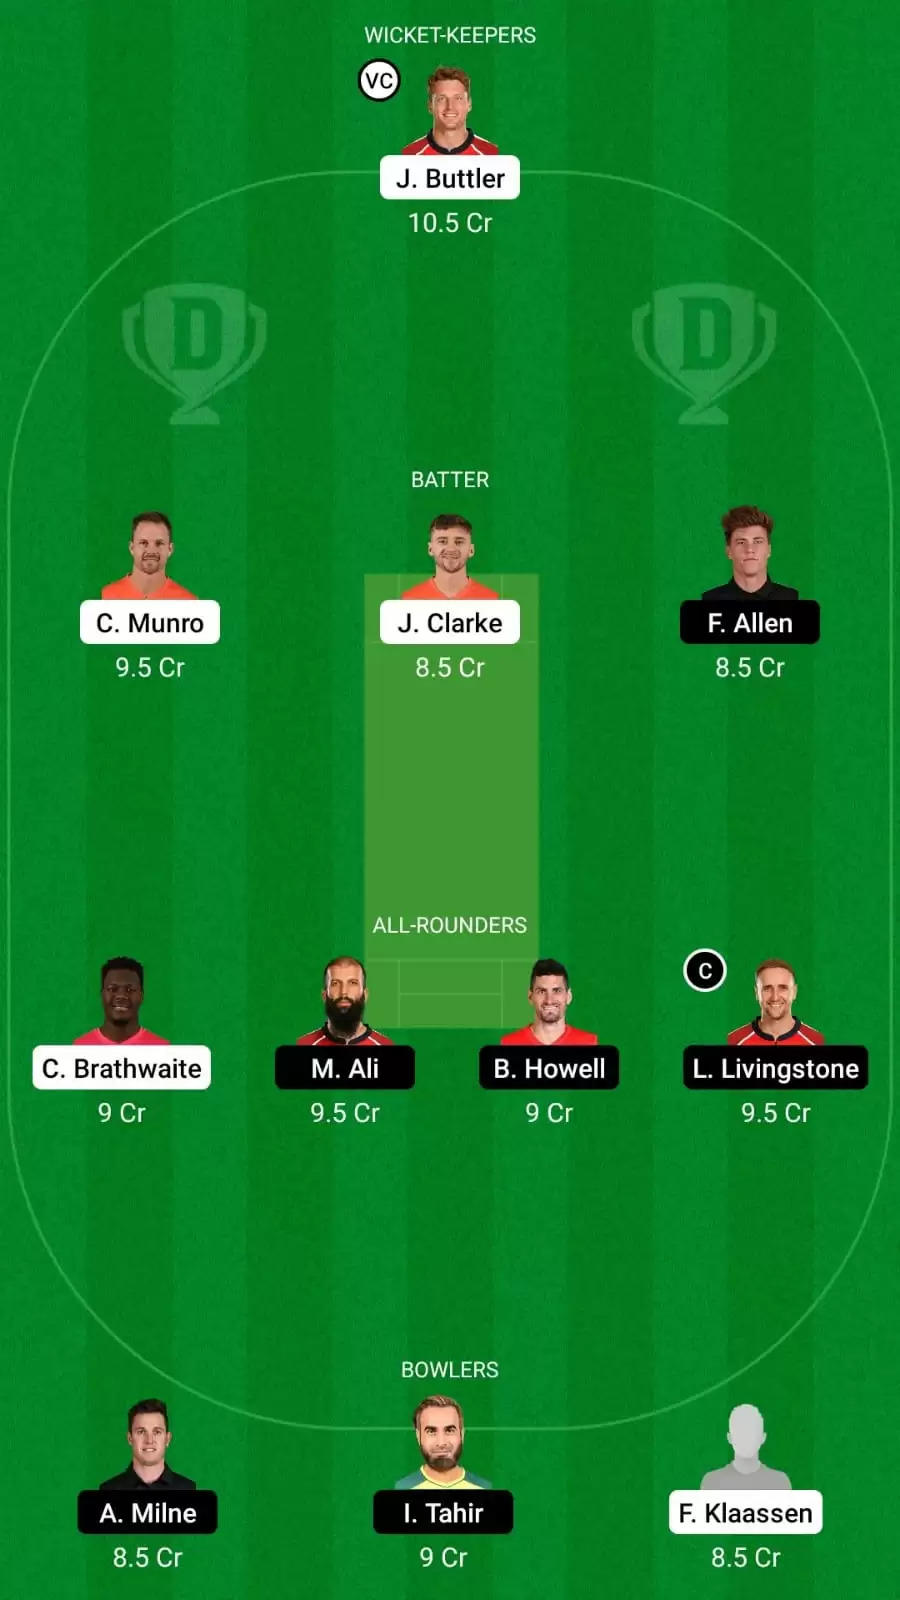 MNR vs BPH Dream11 Team Prediction for The Hundred Men’s 2021: Manchester Originals vs Birmingham Phoenix Best Fantasy Cricket Tips, Strongest Playing XI, Pitch Report and Player Updates